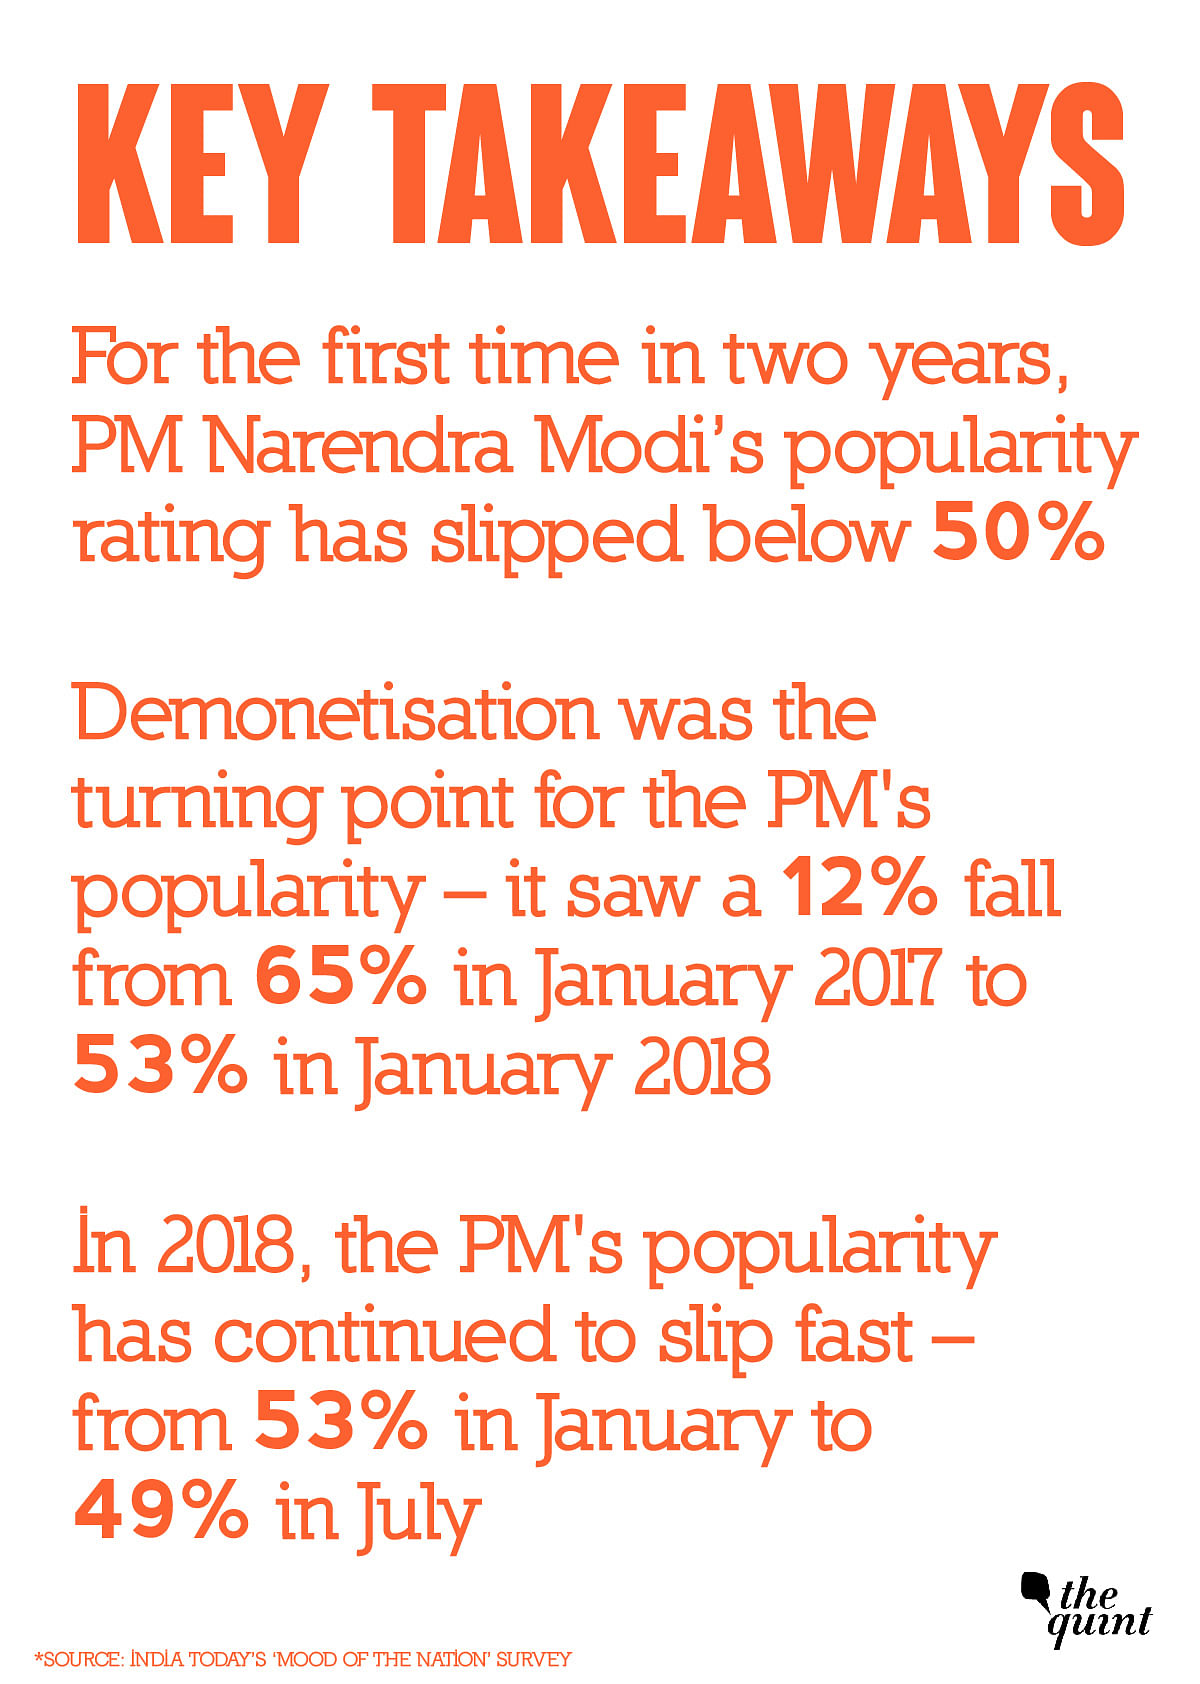 Demonetisation was a turning point. 